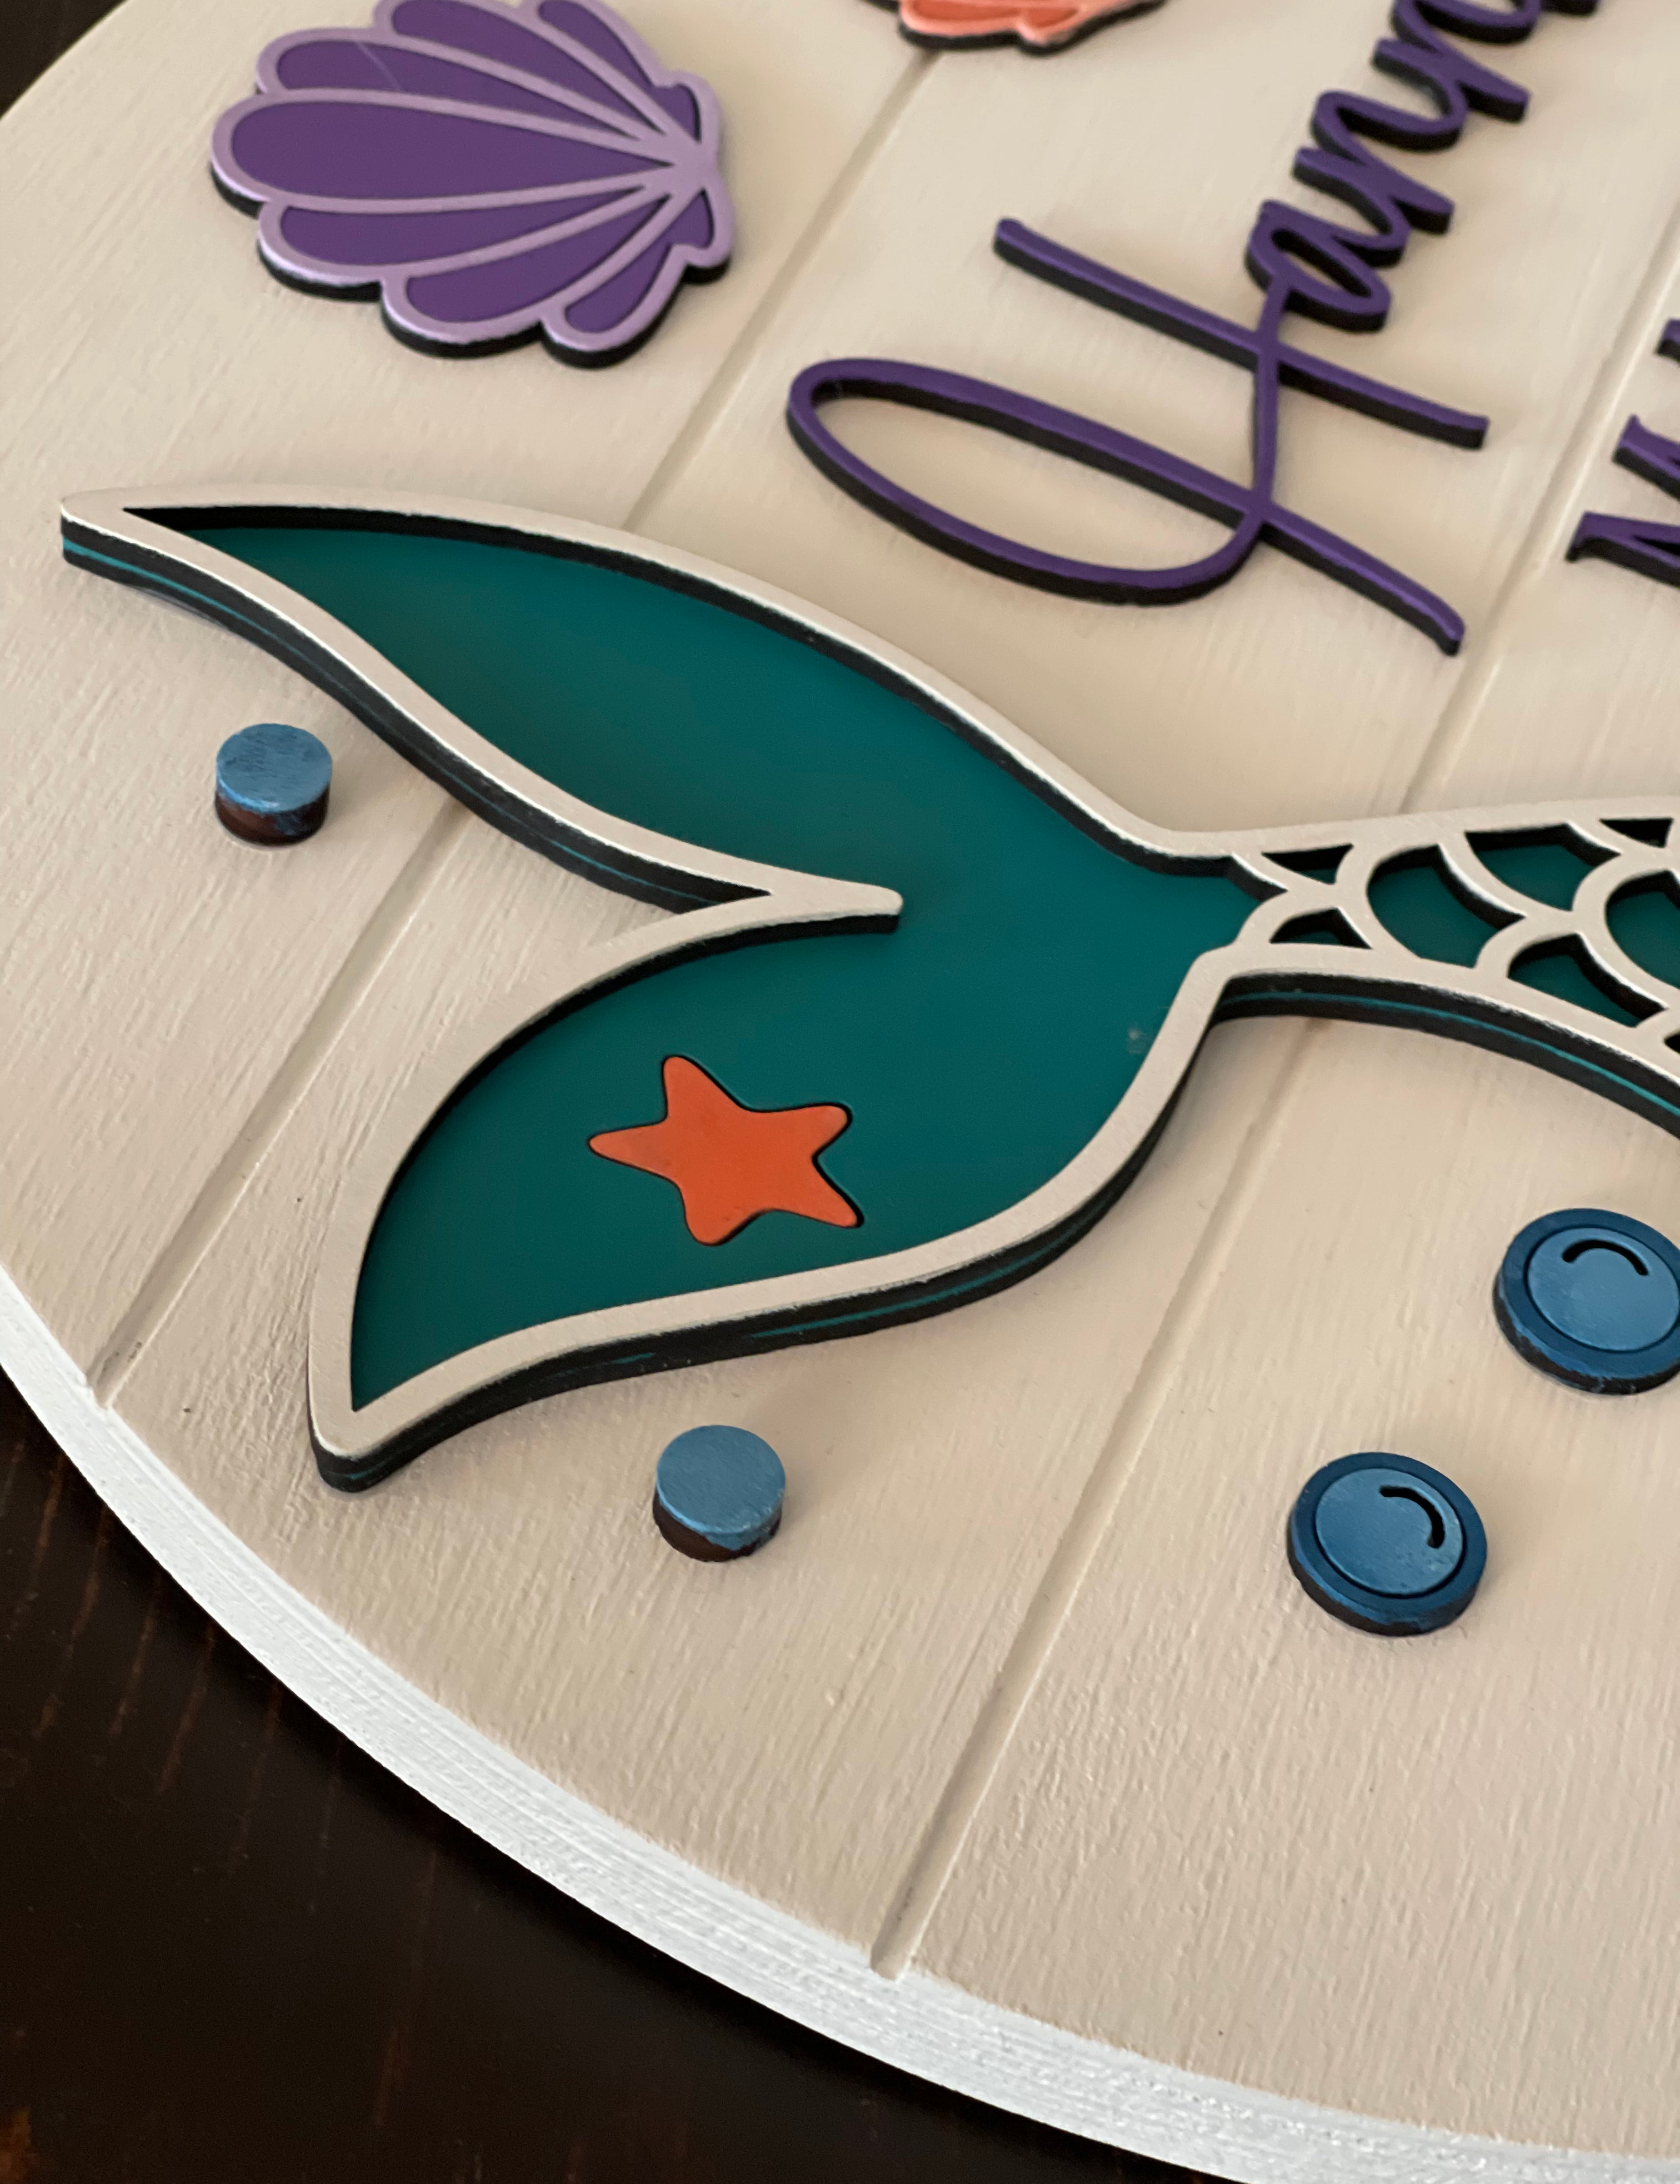 This image shows a close up of the 3D mermaid tail and bubles.